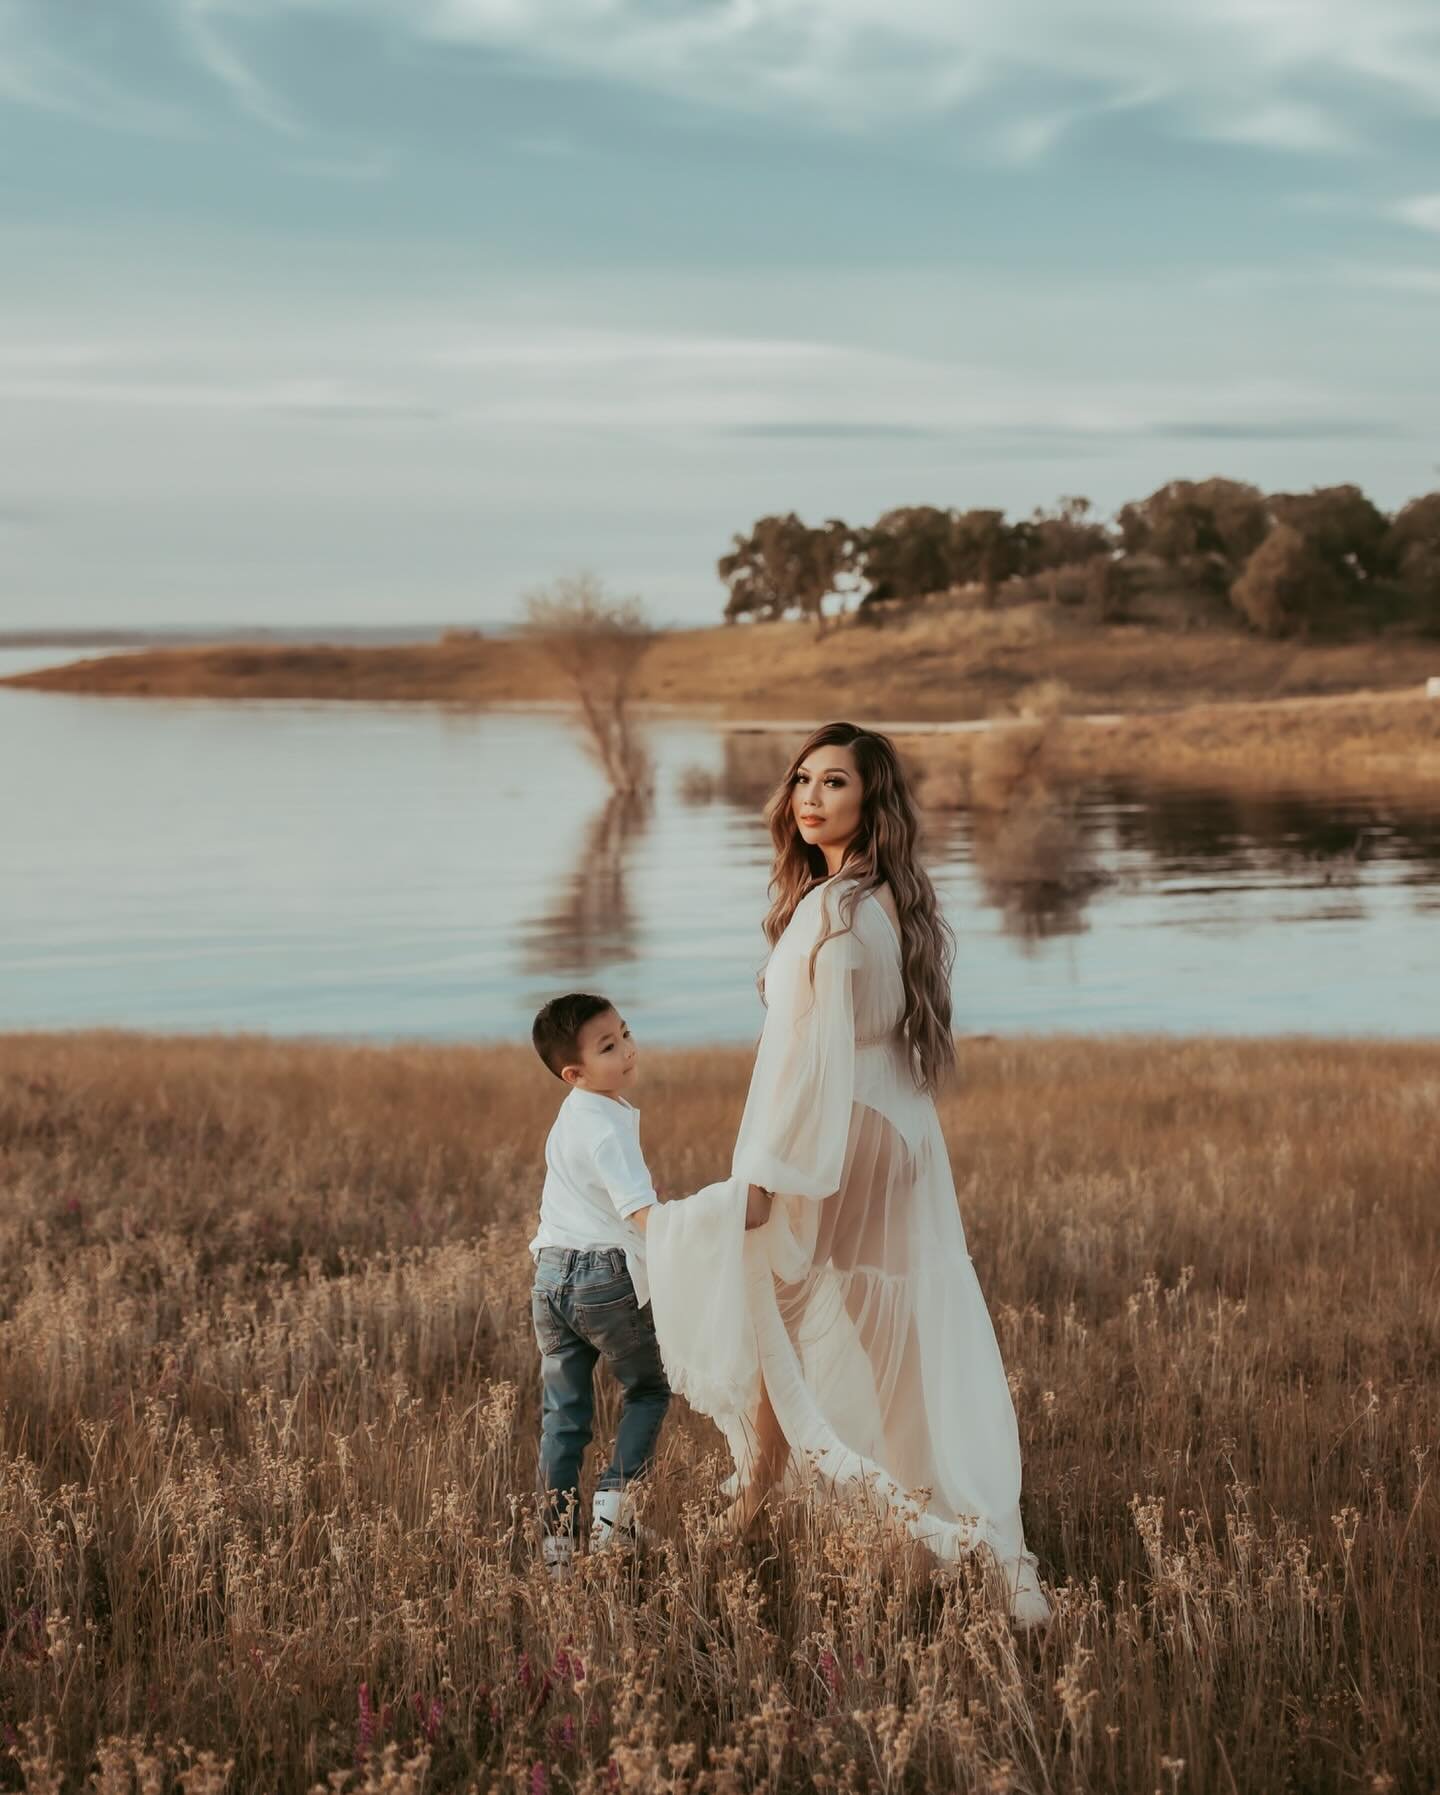 From the rich, golden hues of deep, enduring love to the light, fluffy sweetness of a cotton candy kind of love, each one holds its own beauty and magic.
.
Capturing the moments of @sidneyle and her family was an experience that left me in awe. The d